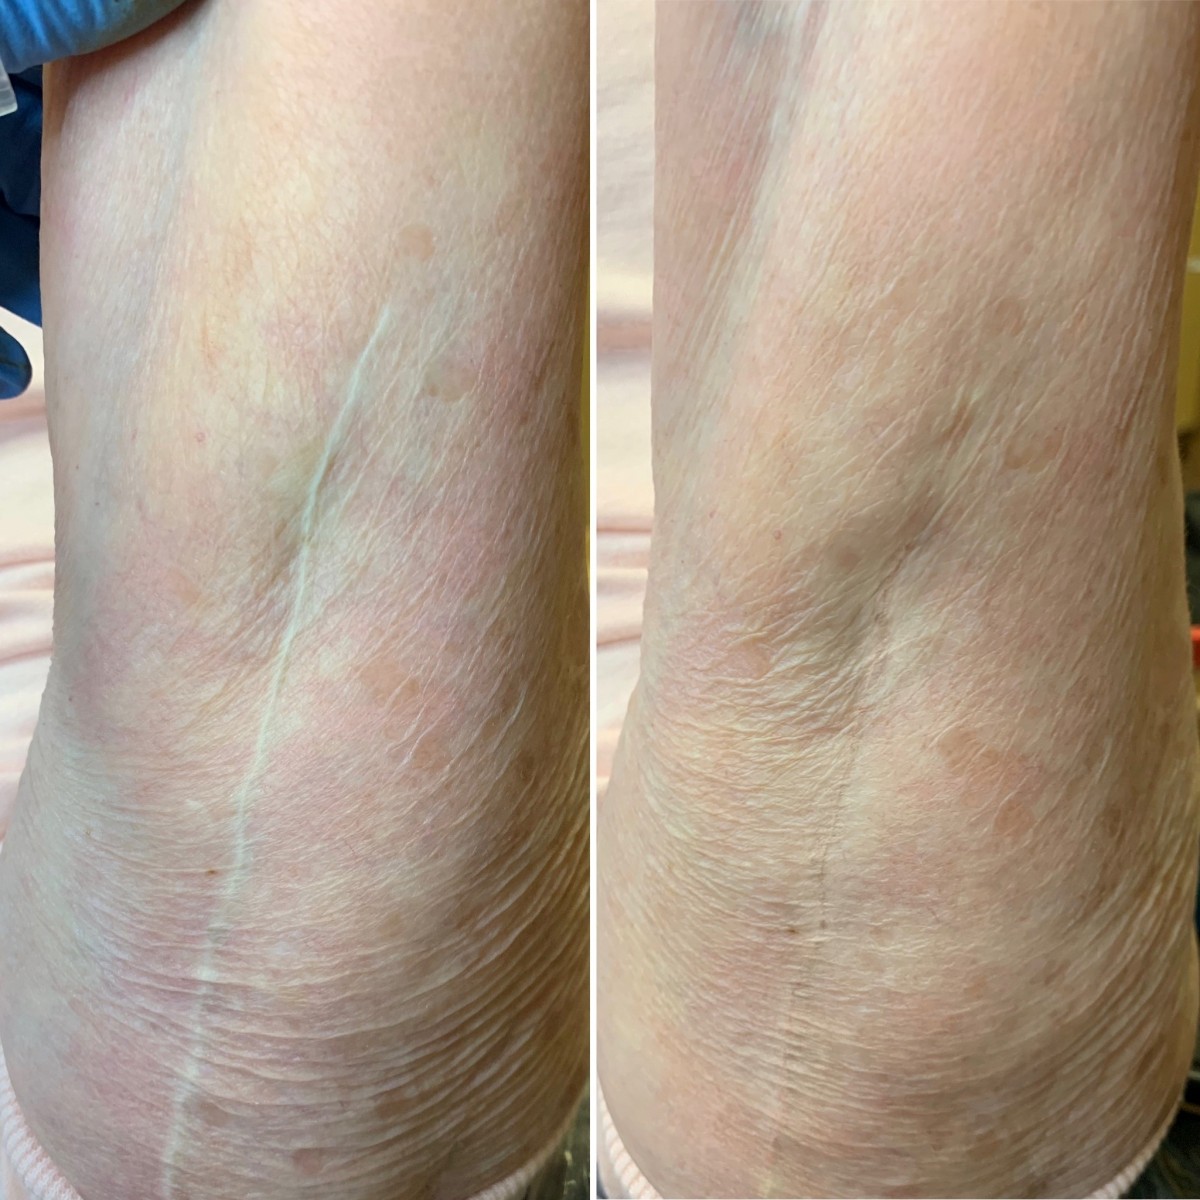 Brachioplasty Arm Lift Before and After Photos  Graham Plastic Surgery